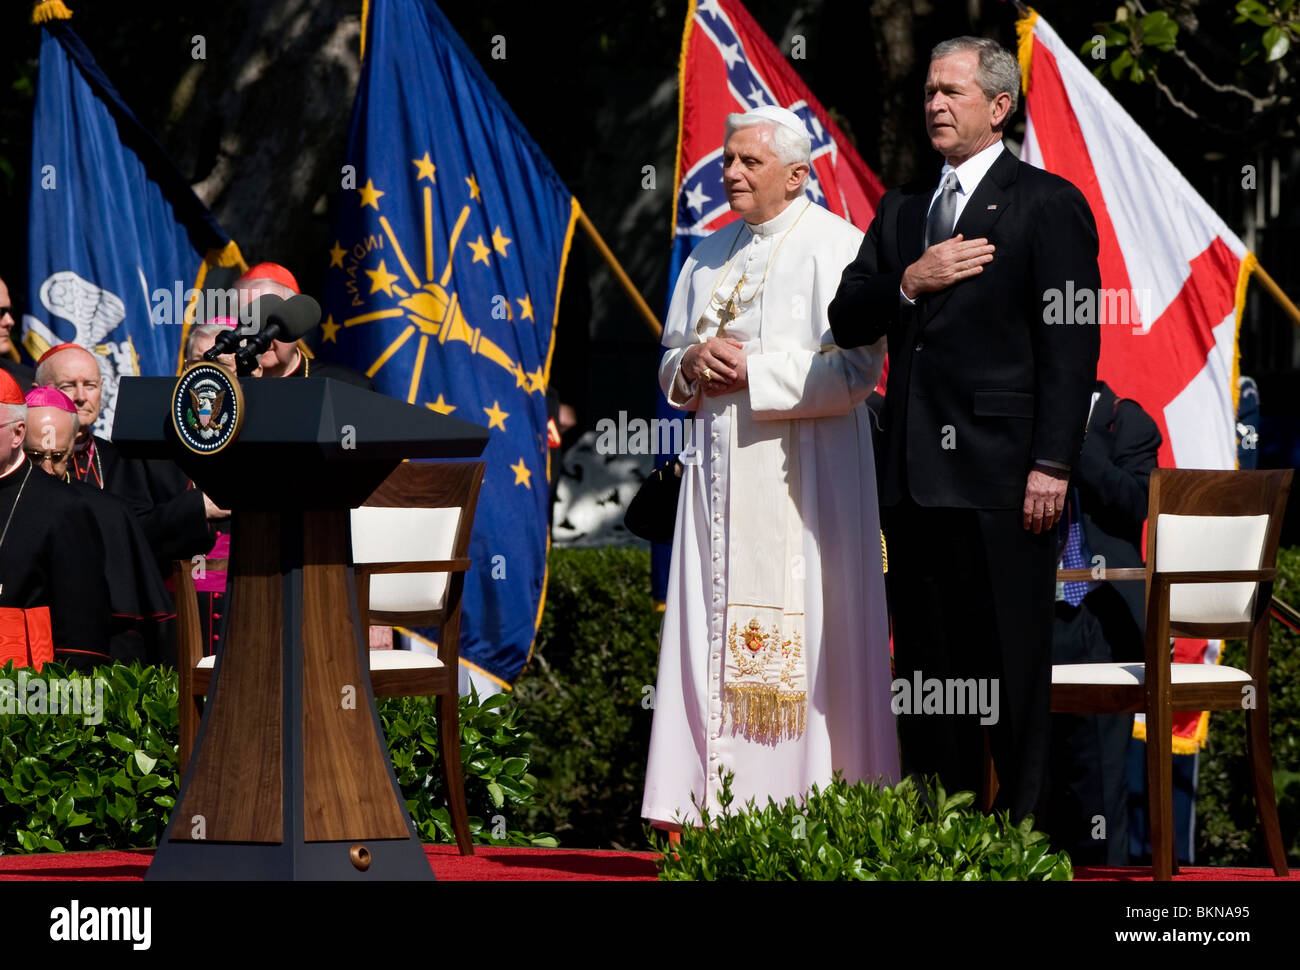 Pope Benedict and President George W. Bush during the Papal visit to the White House. Stock Photo